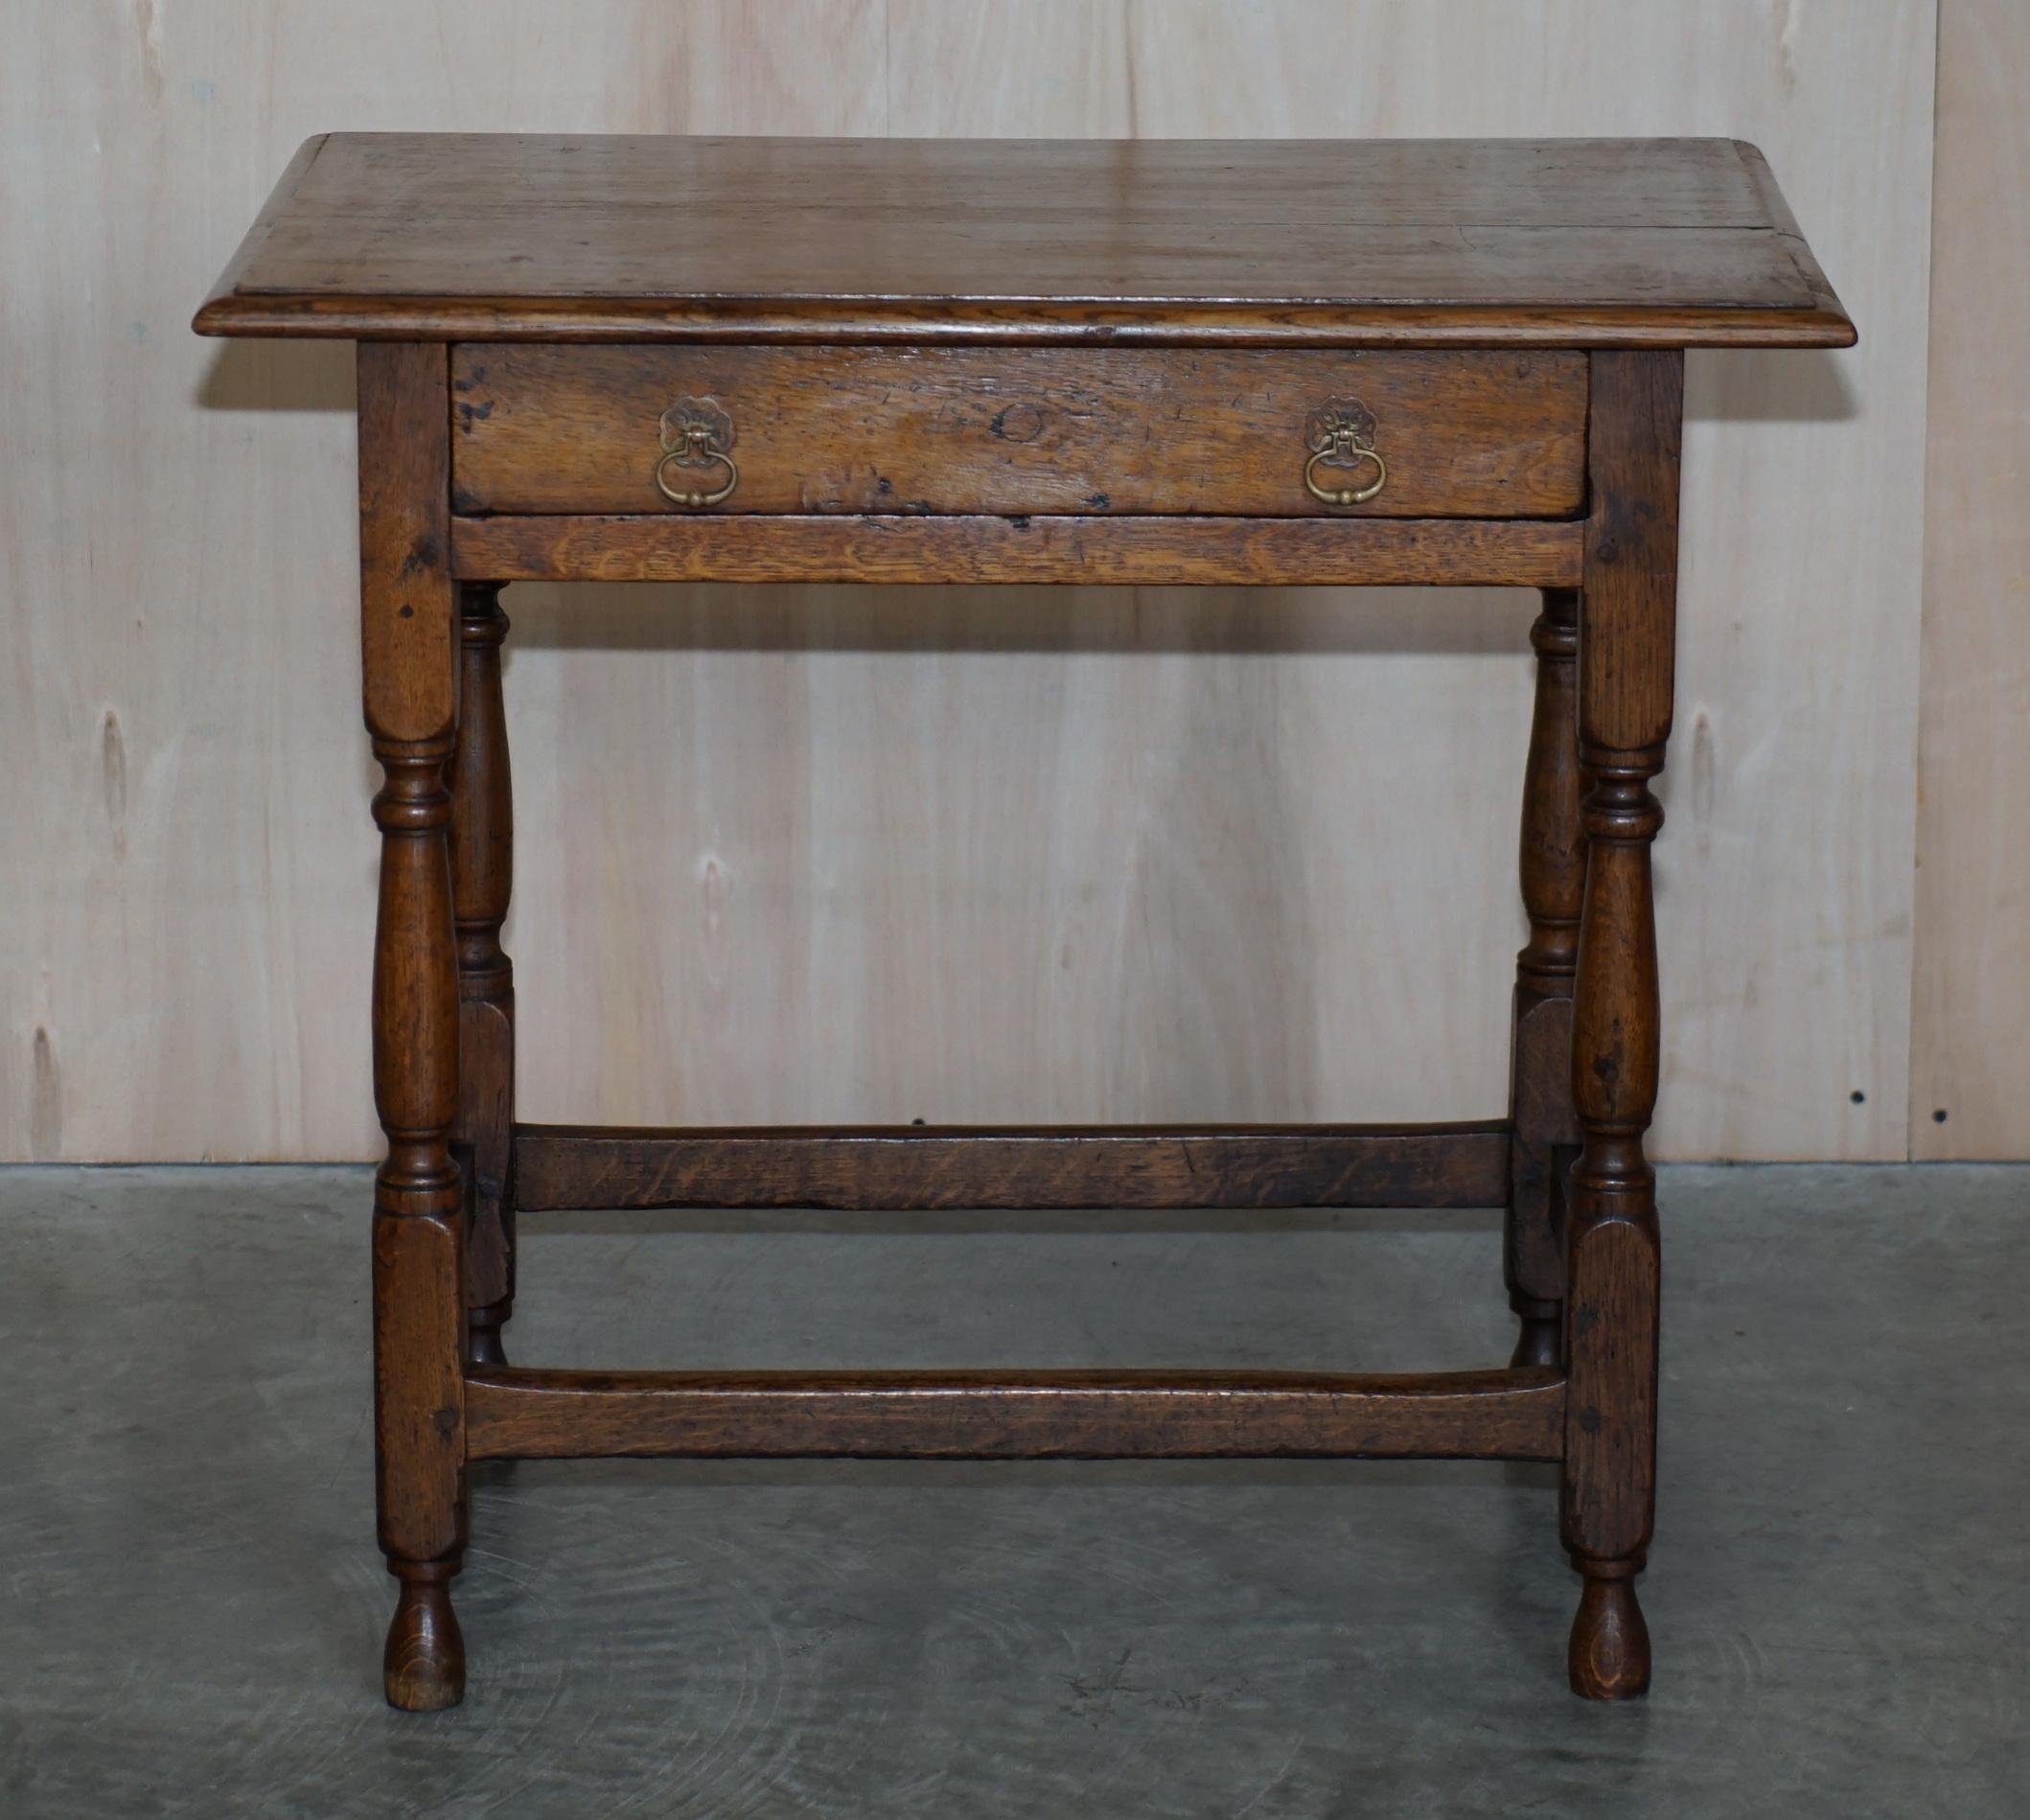 We are delighted to offer for sale this stunning circa 1700 English Oak jointed Lowboy side table with large single drawer and William & Mary handles

A good looking well made and decorative piece, for circa 320 years old it has survived in